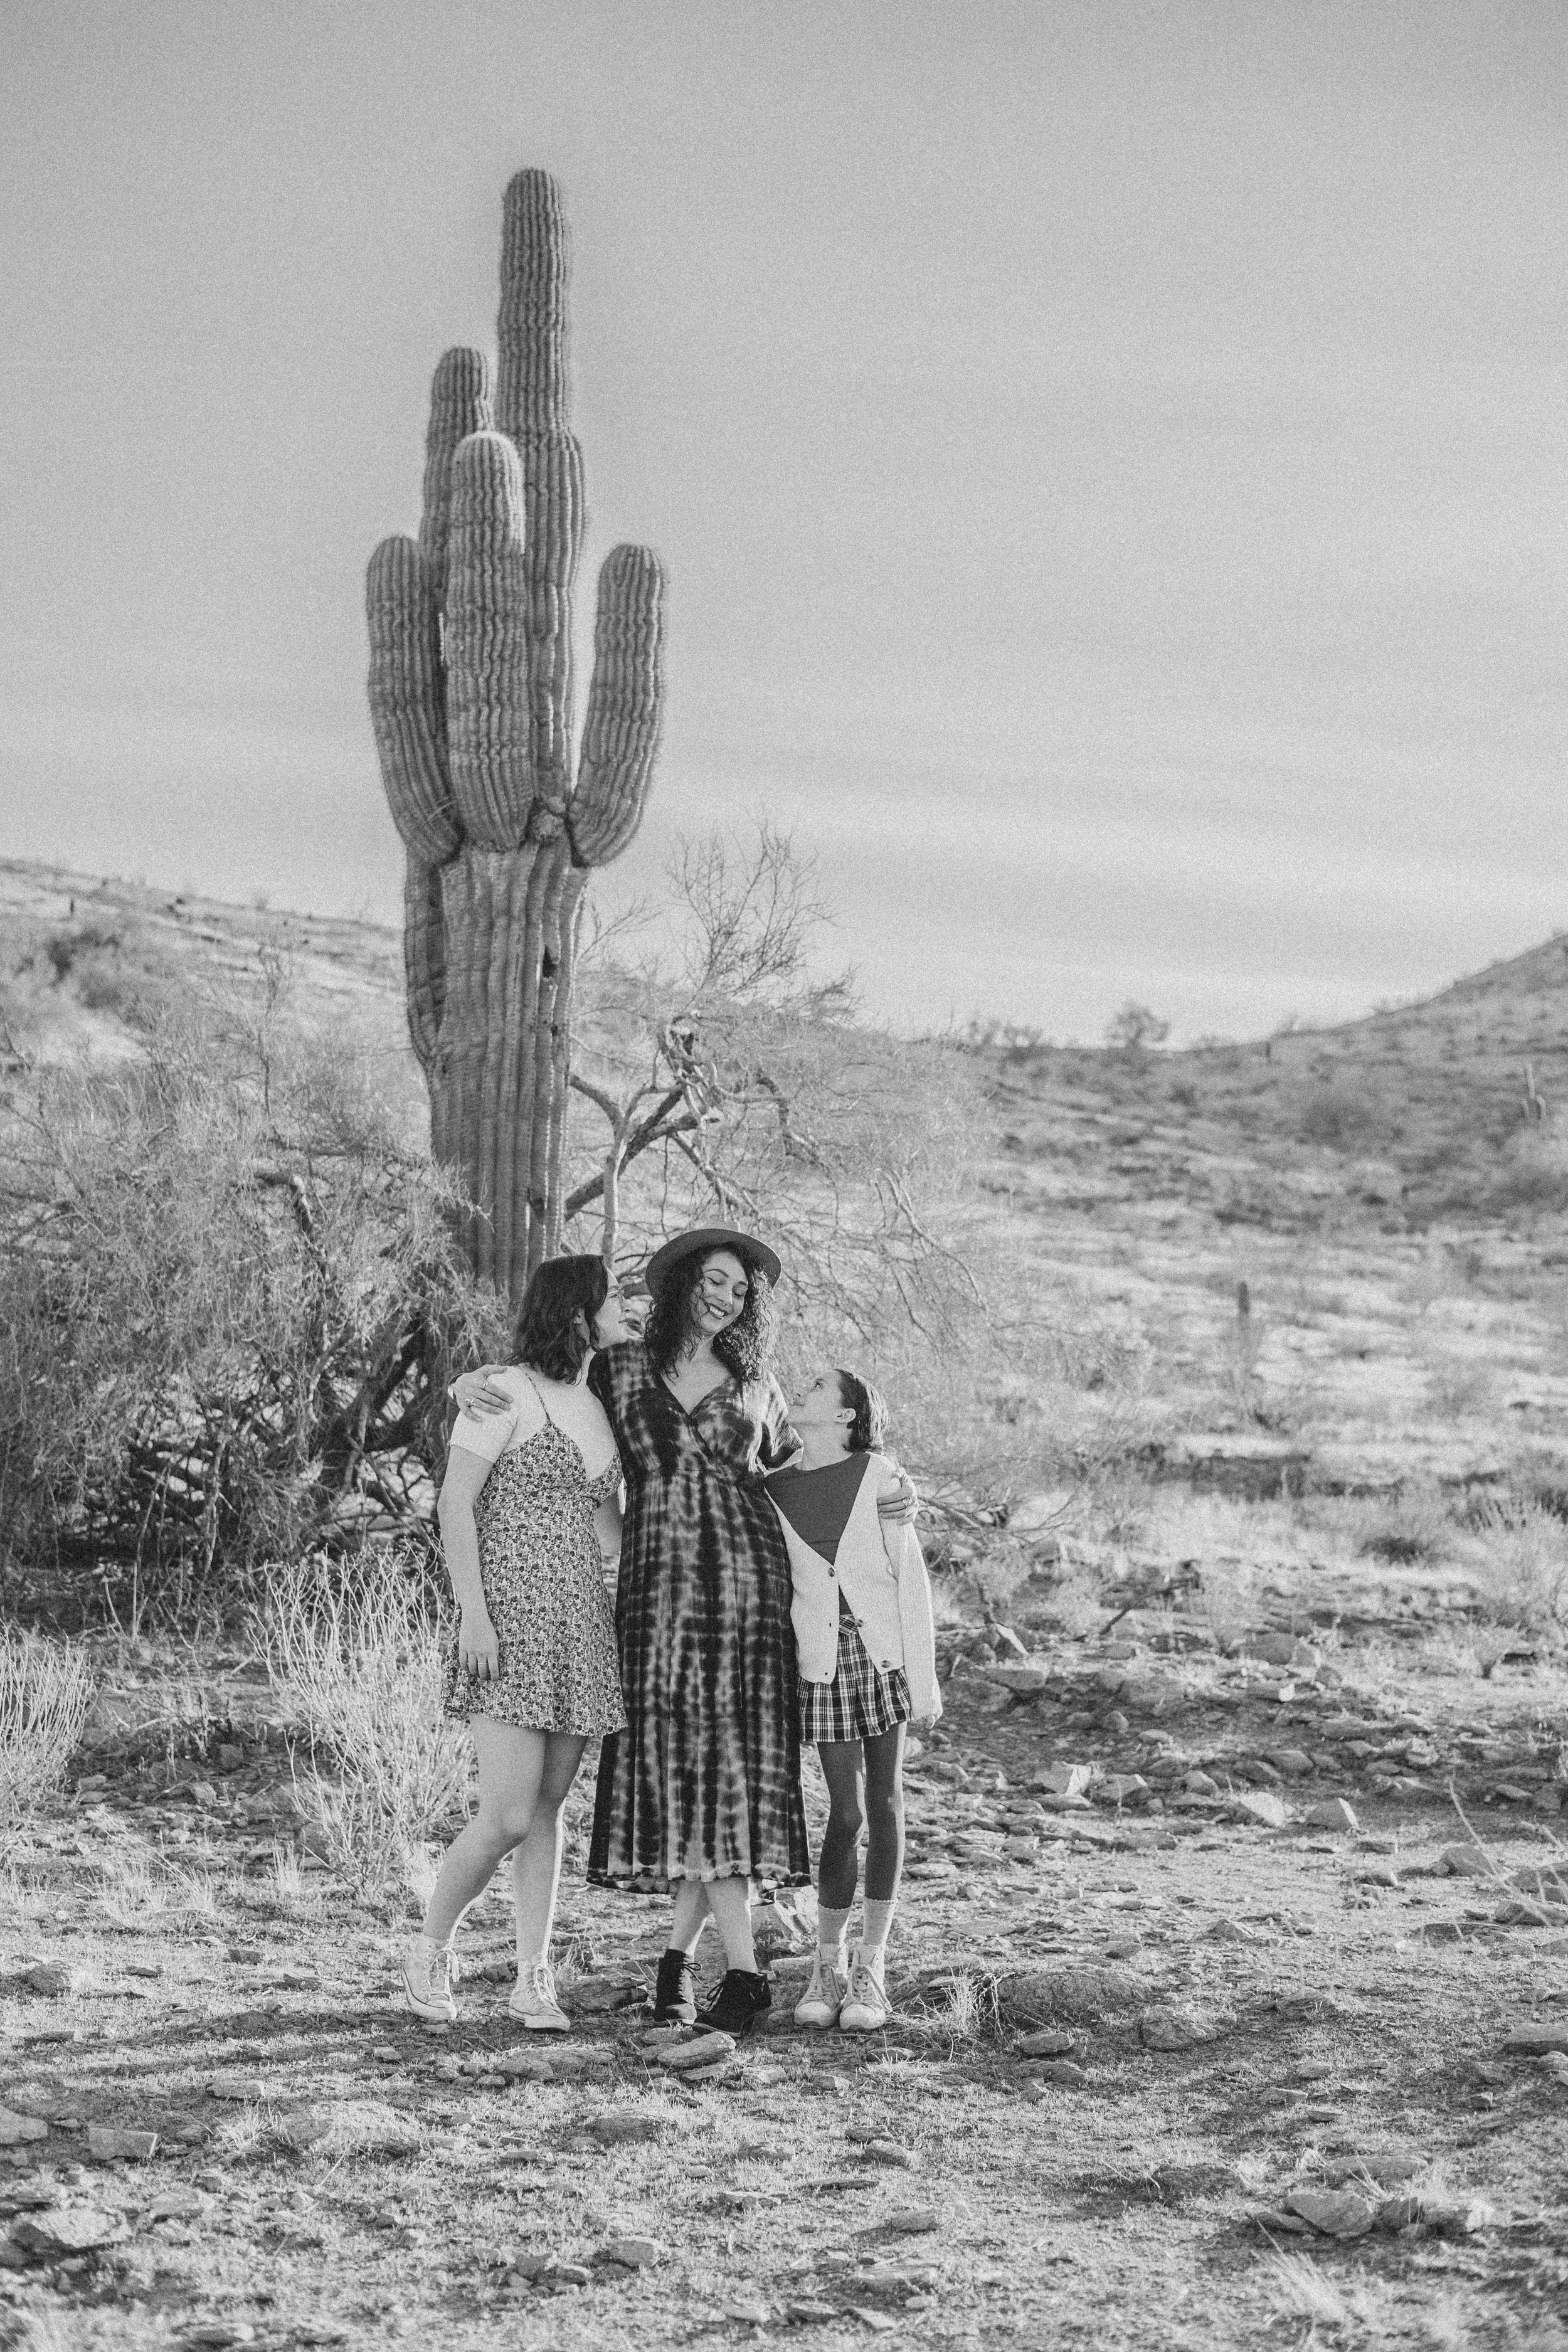 Women pose in front of saguaro cactus during their desert family photography session with Phoenix photographer, Jennifer Lind Schutsky.